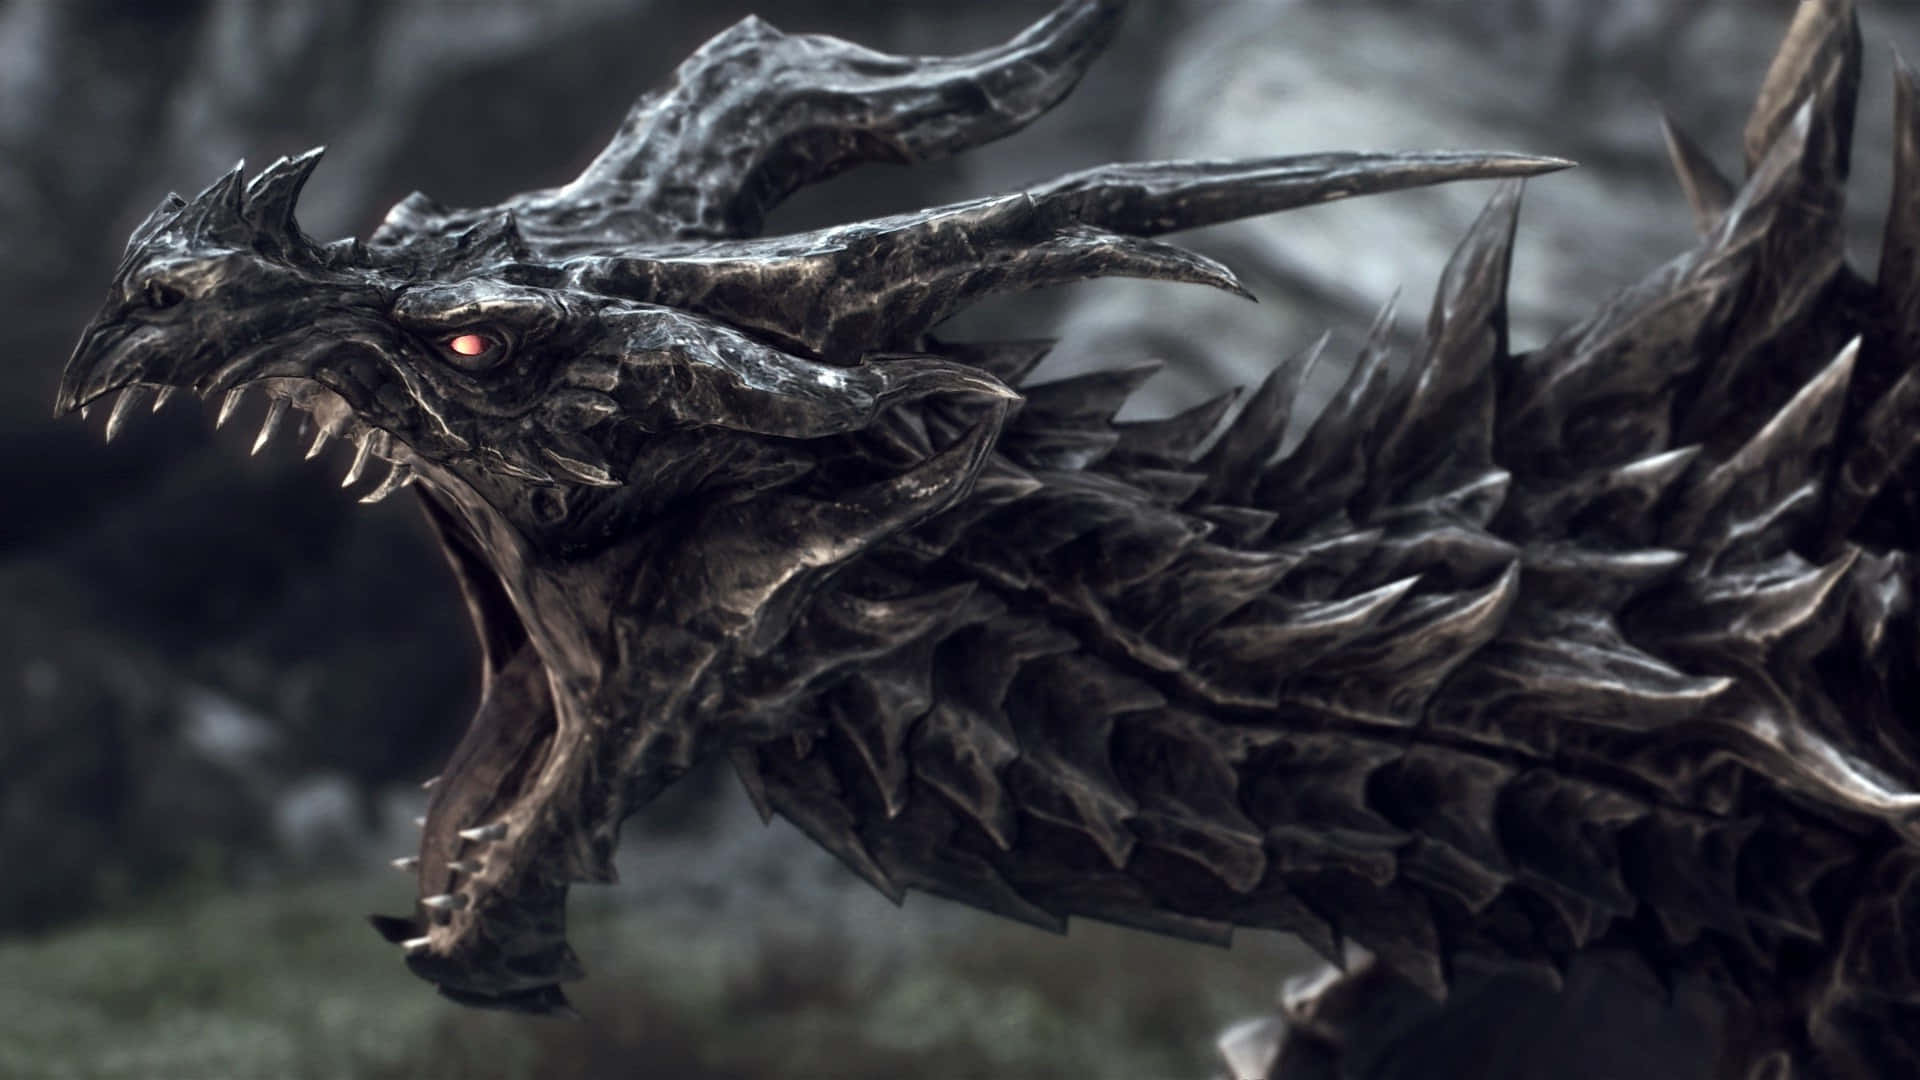 Alduin, the World Eater, menacingly approaches in all its glory in The Elder Scrolls V: Skyrim. Wallpaper